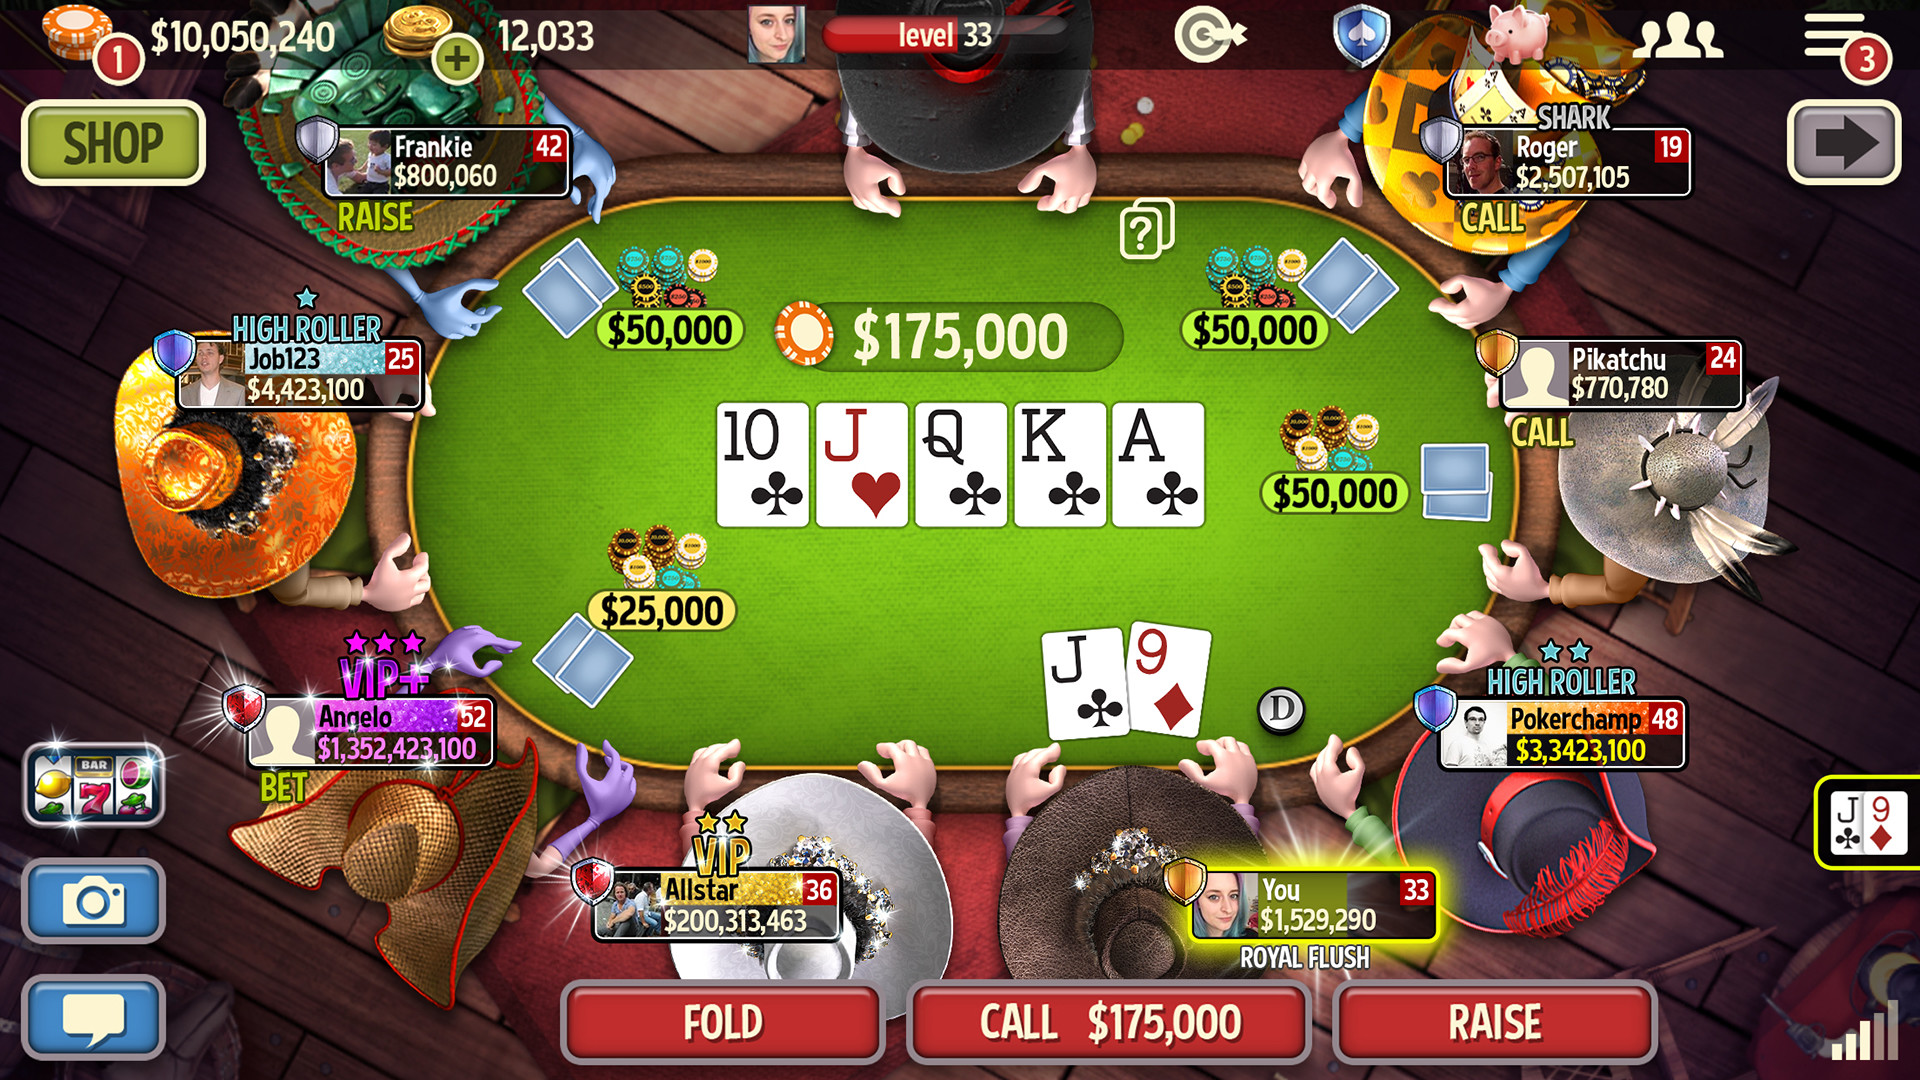 Governor of Poker 3 Discounts - wide 10